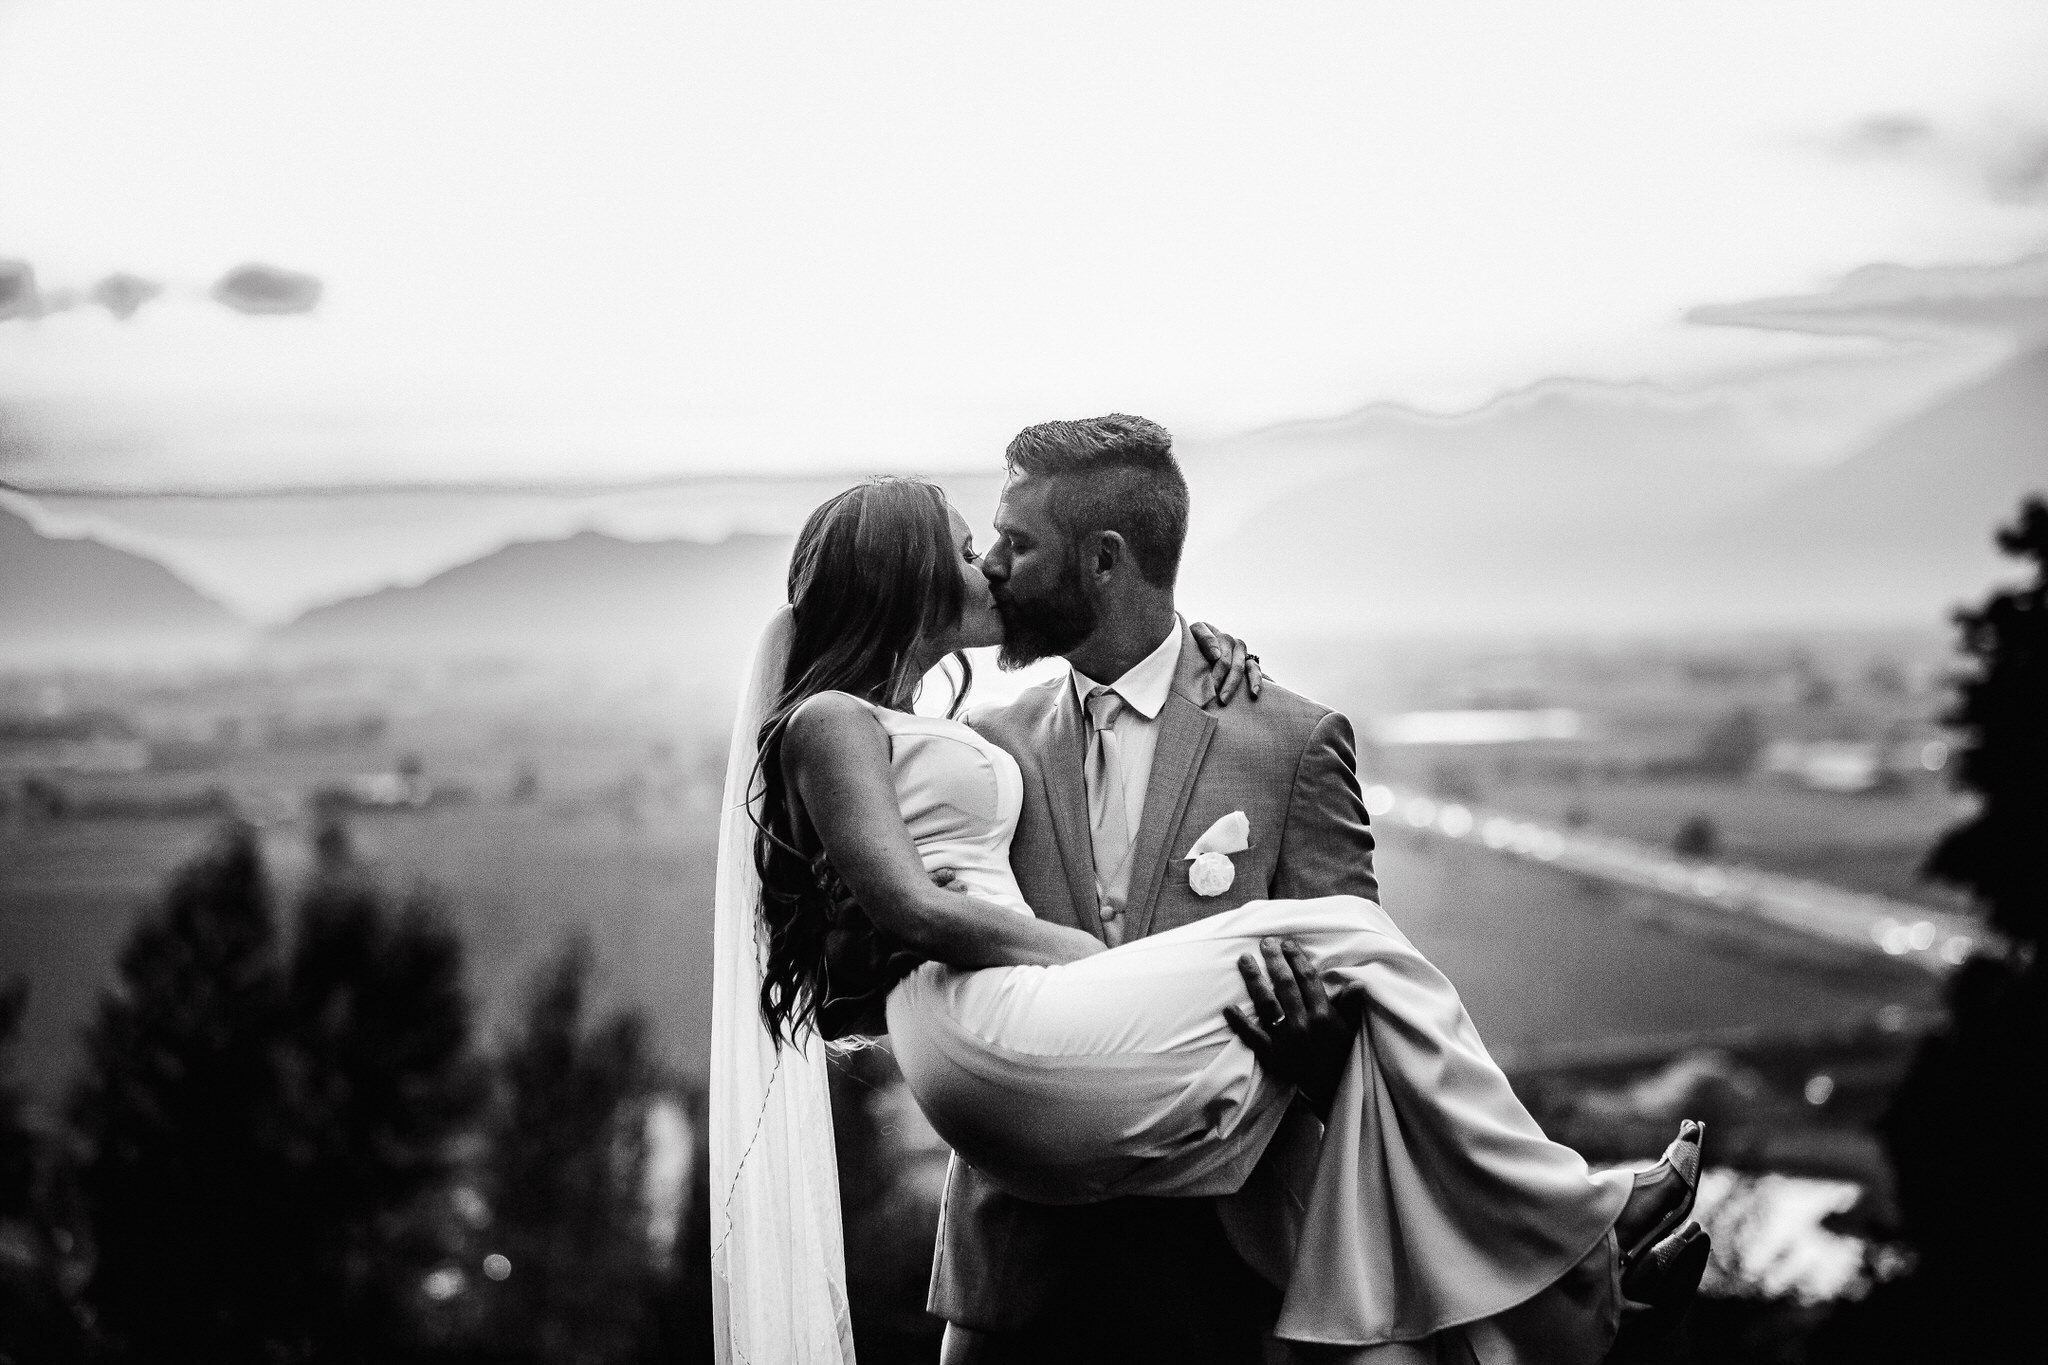 Top Rated Fraser Valley Wedding Photographer at The Falls Golf Course Wedding Venue